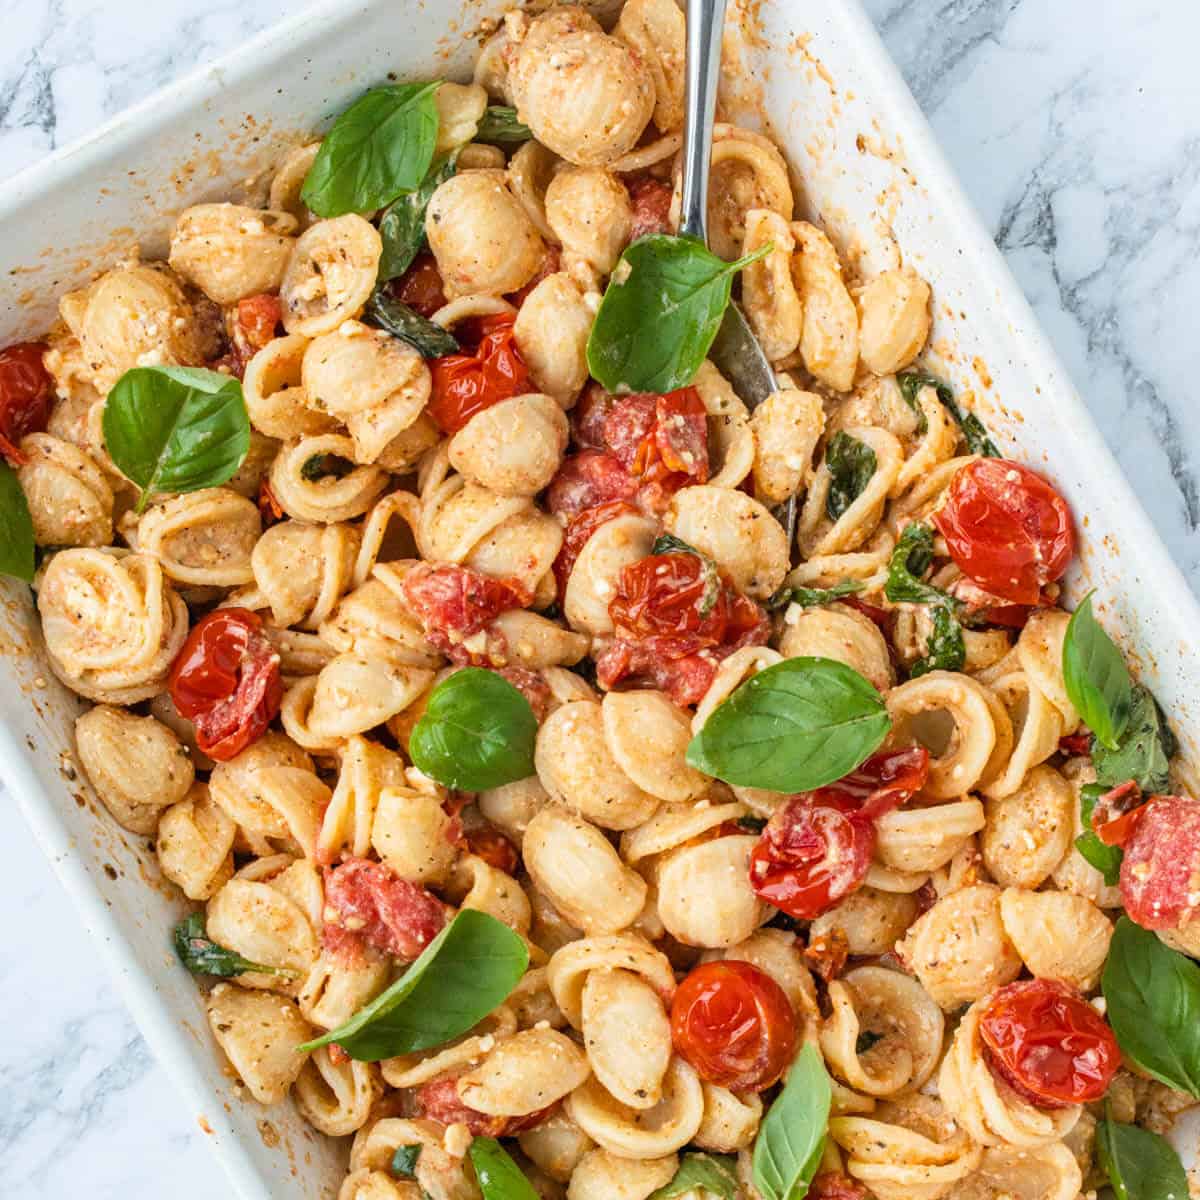 How to Cook Pasta Perfectly {Easy Instructions} - FeelGoodFoodie